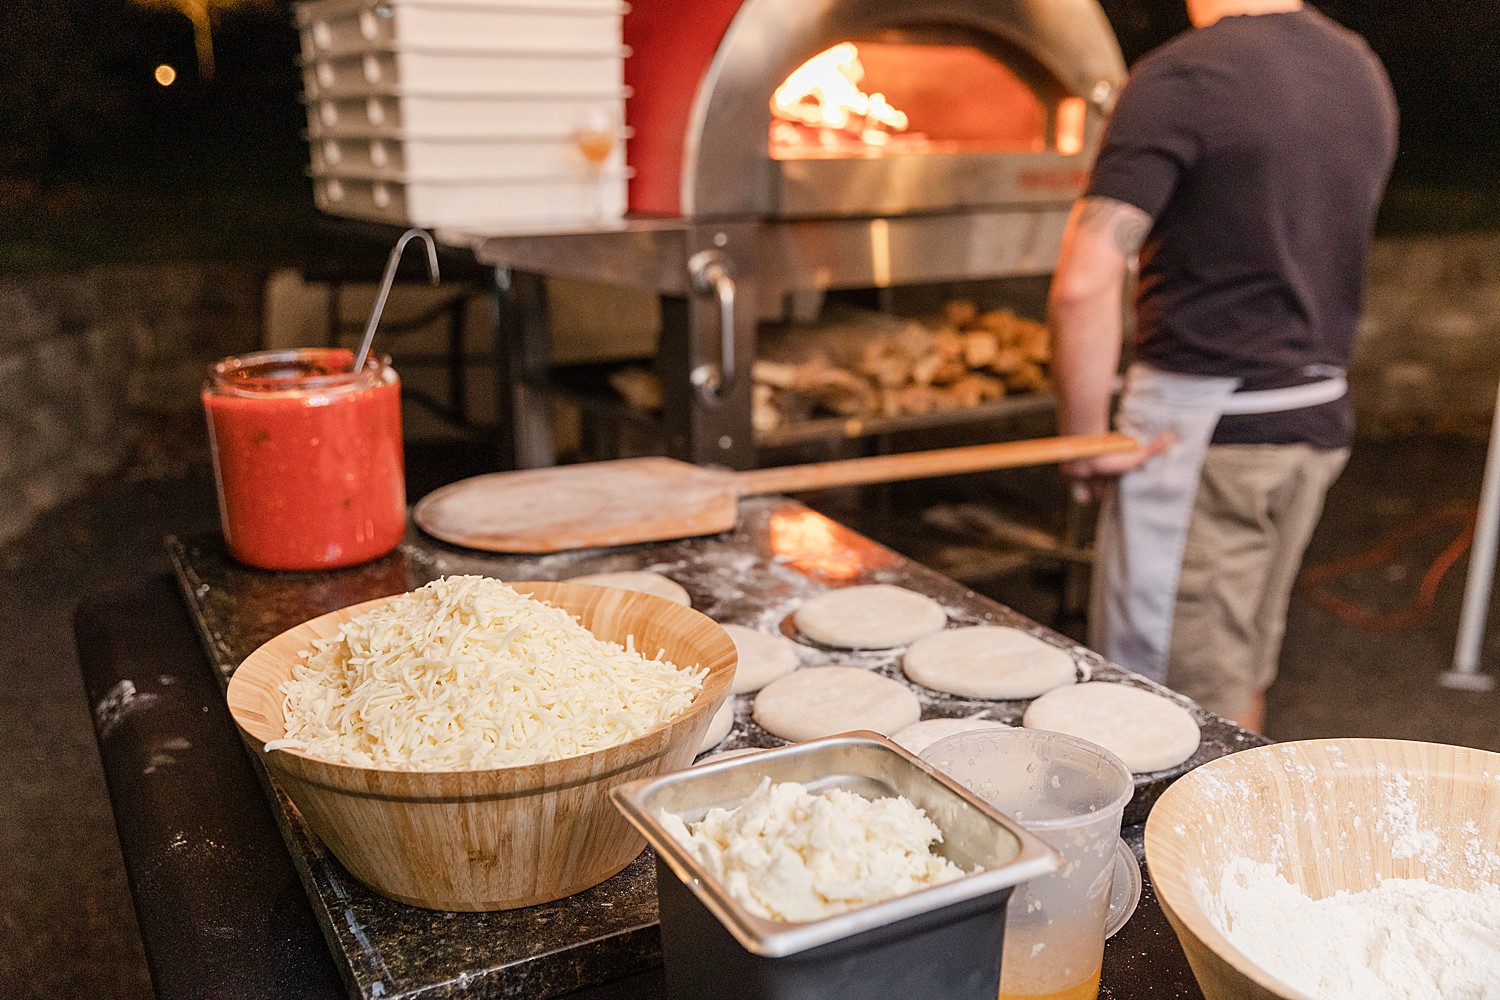 wood fired pizzas made as goodnight snacks for wedding guests